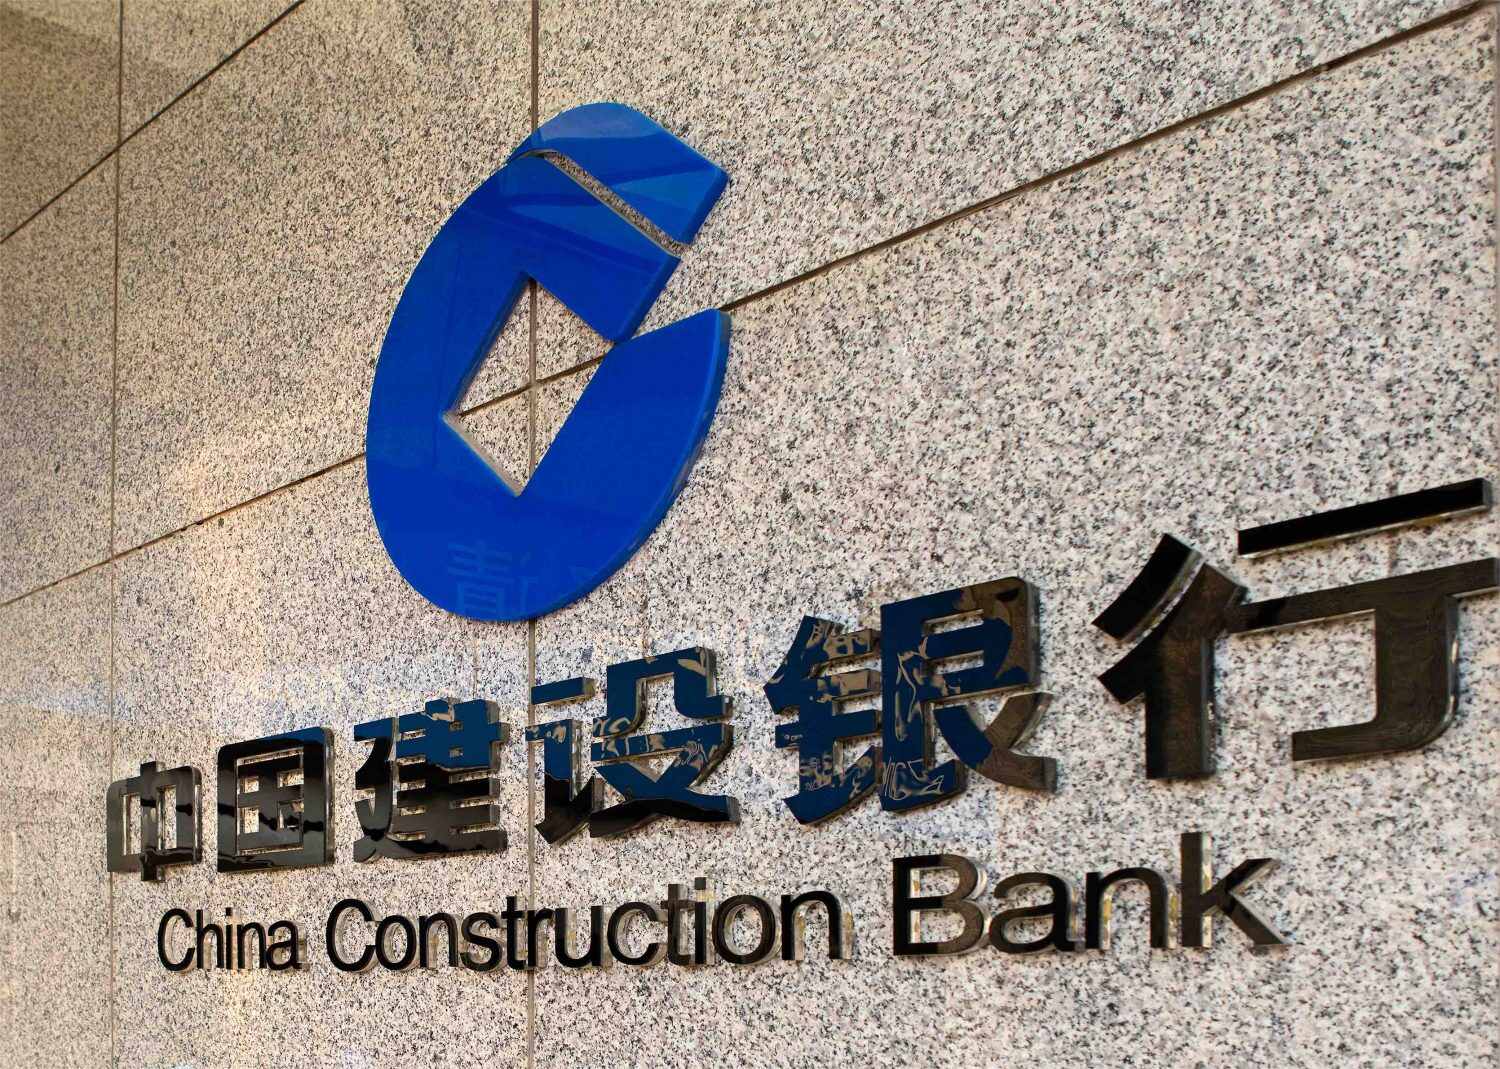 16-enigmatic-facts-about-china-construction-bank-ccb